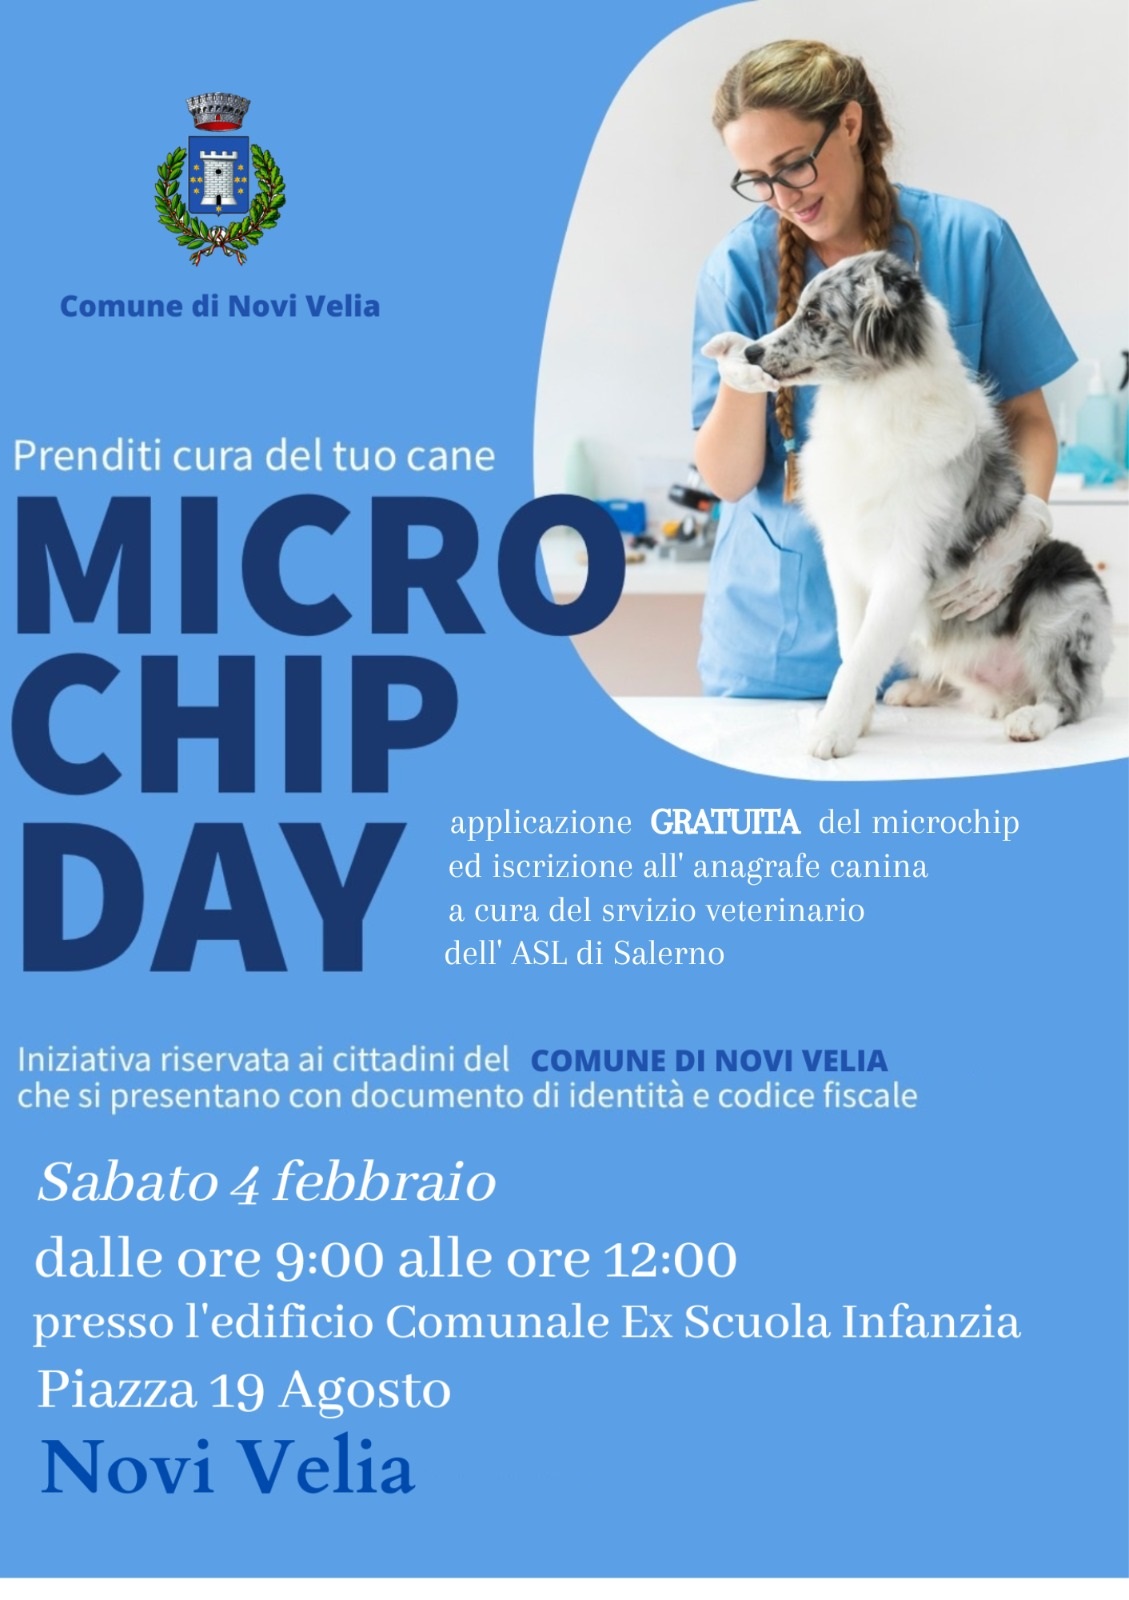 MICRO CHIP DAY 